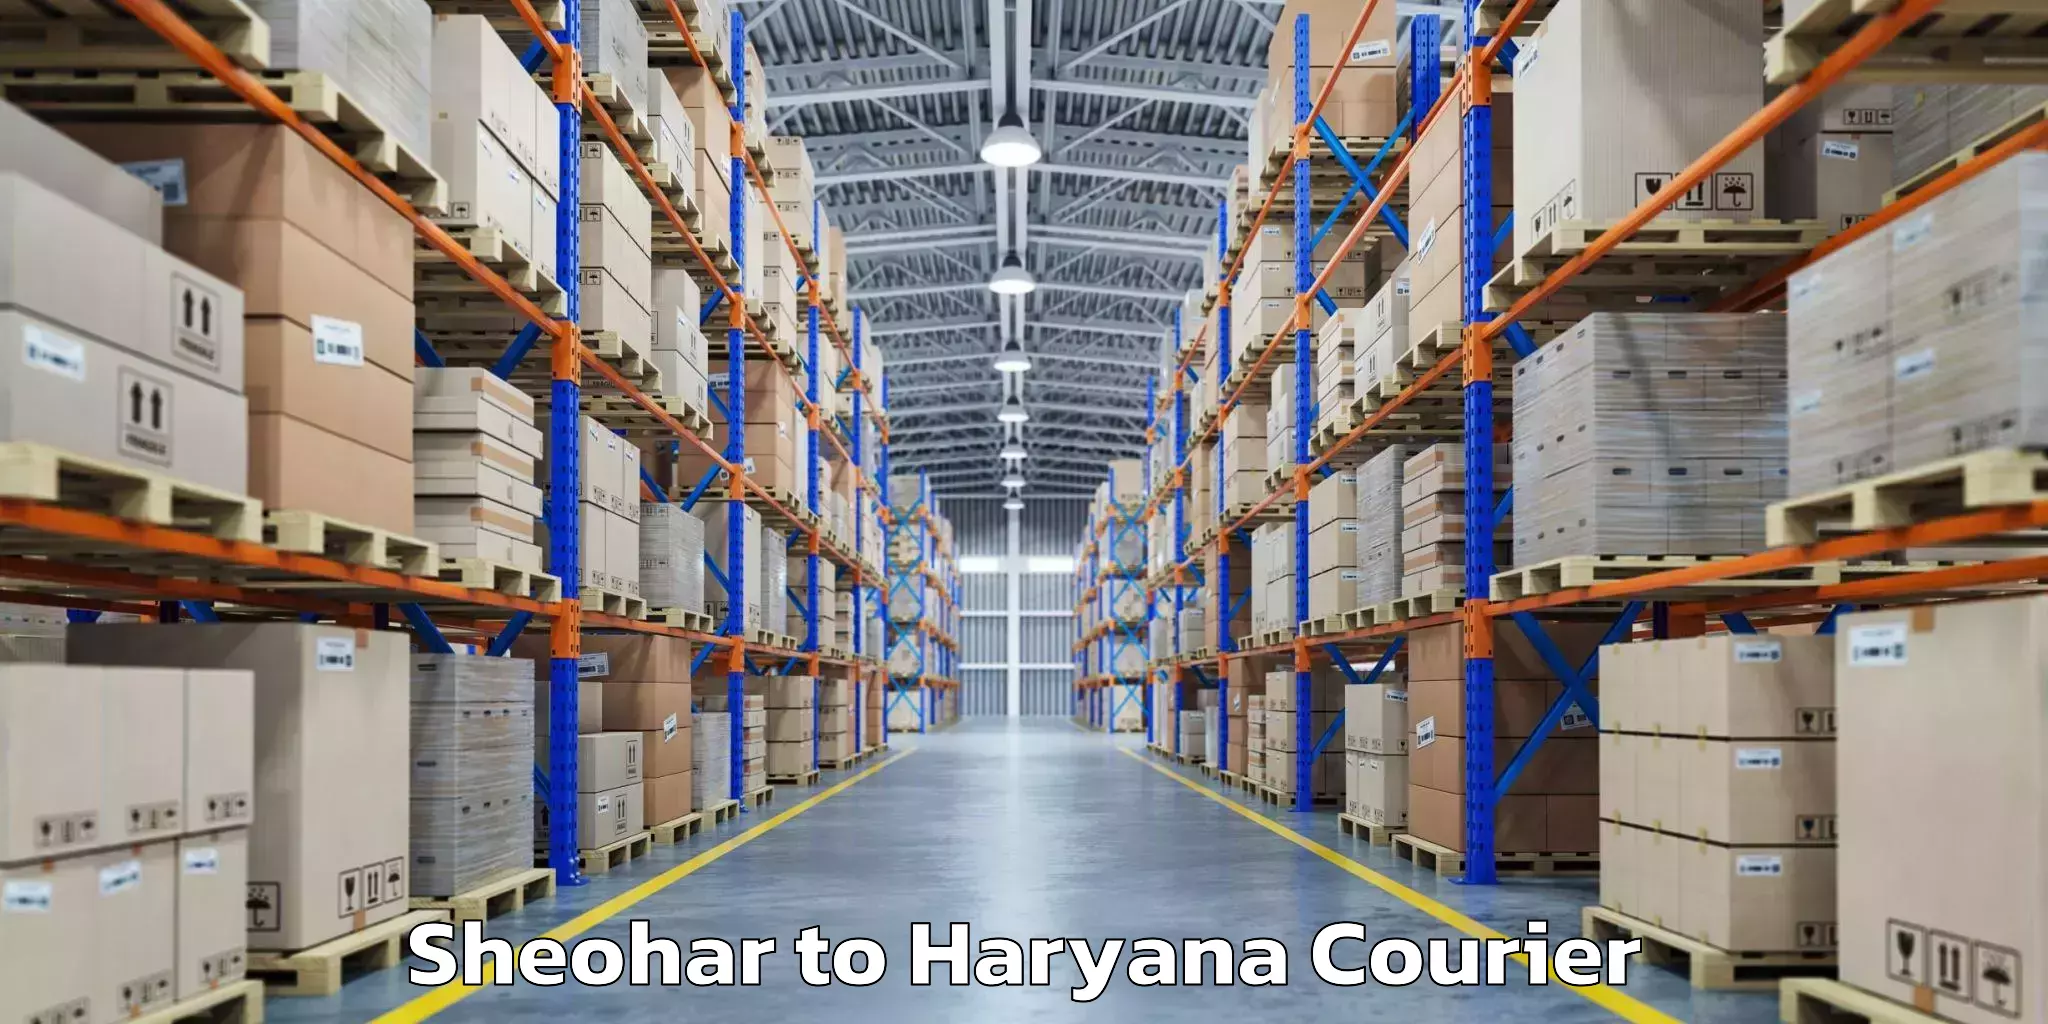 Instant baggage transport quote Sheohar to Bilaspur Haryana